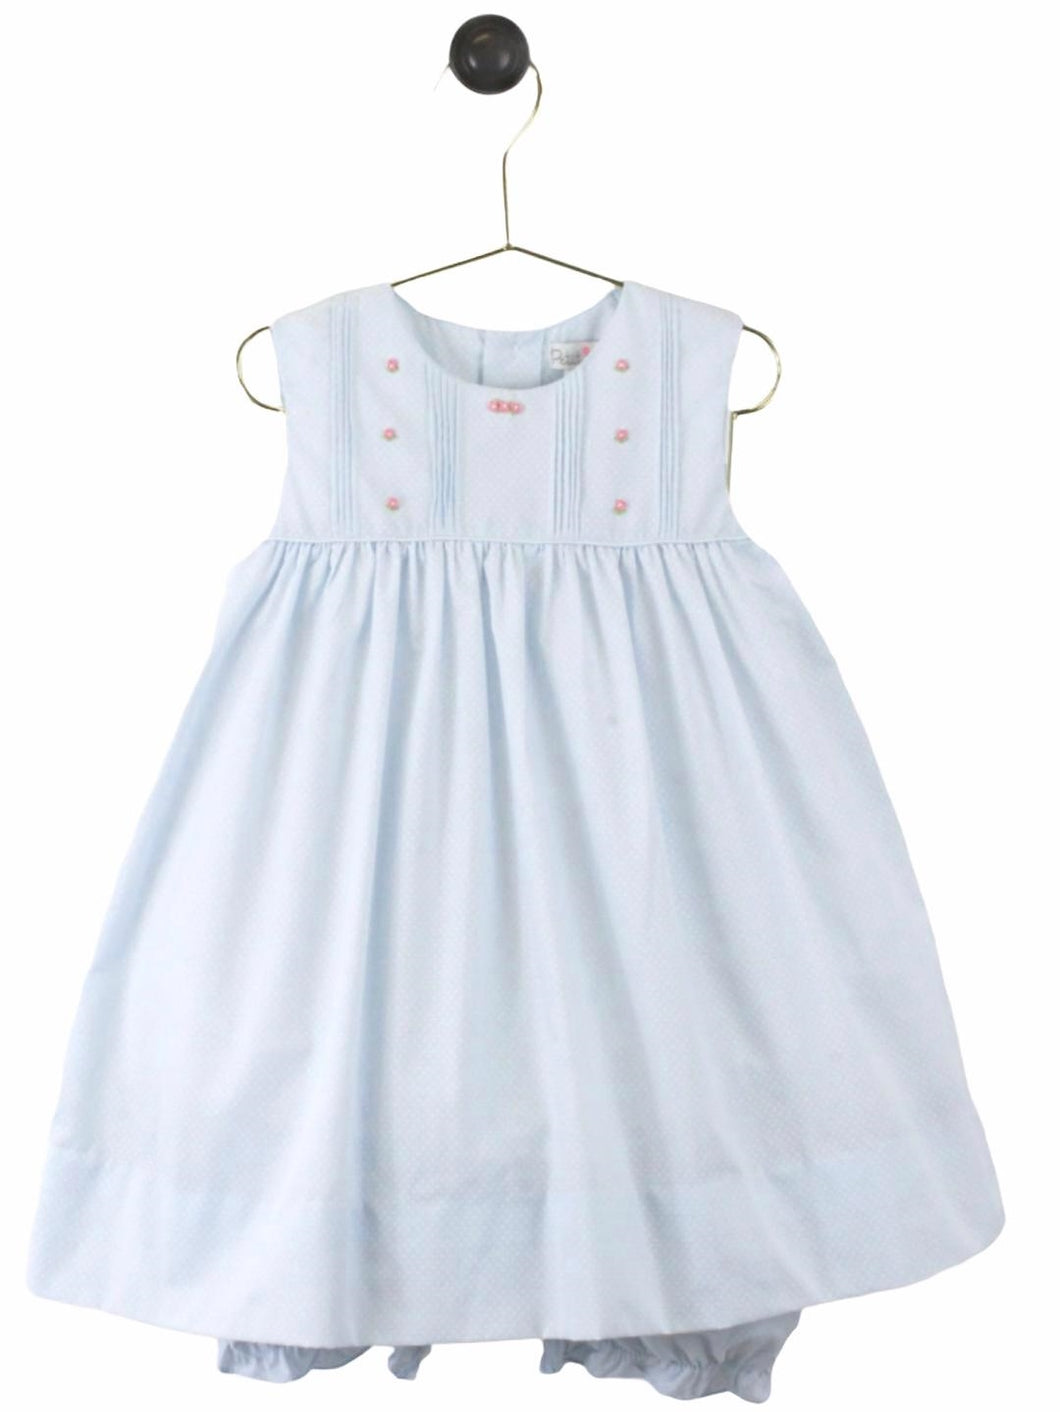 Light Blue Dot Dress Set with Pintucks and Emboidery | 24 Months